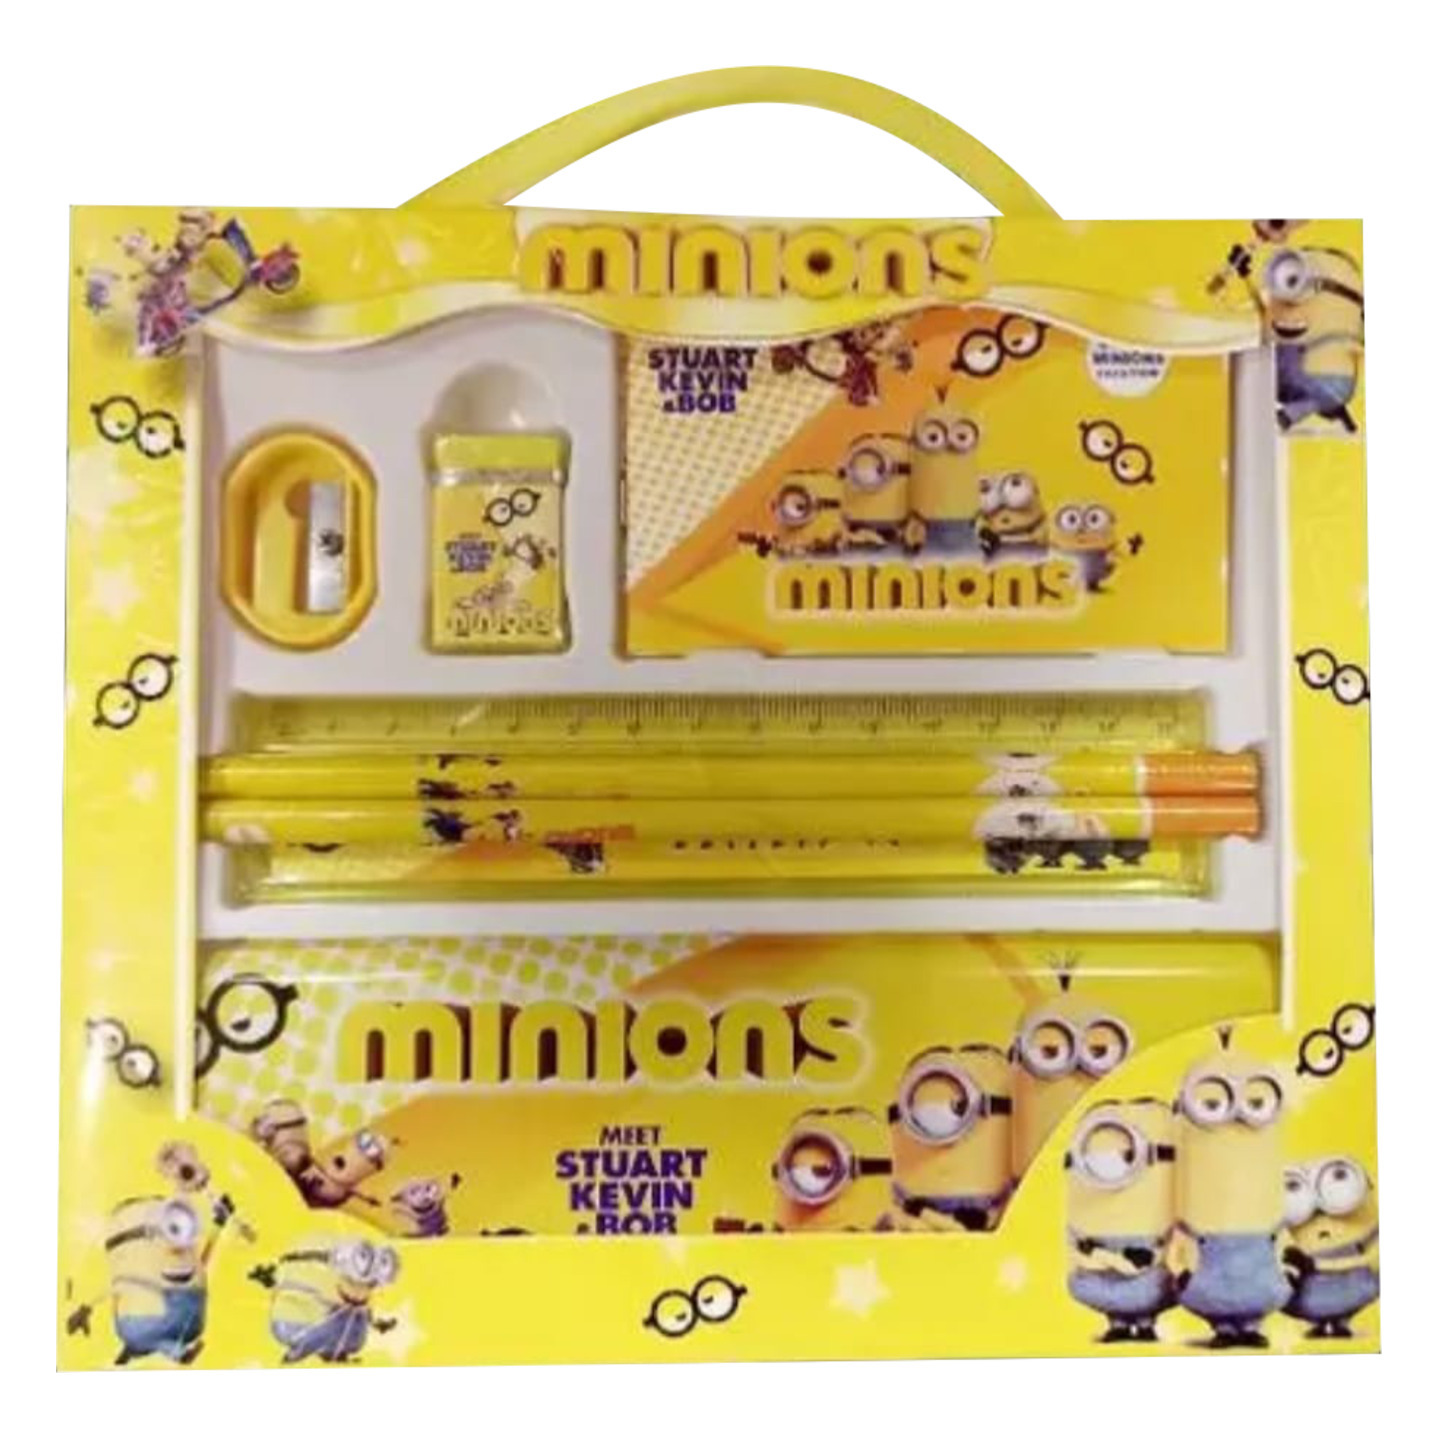 Minions Print Stationary School Set  Kit  Case  Organizer For Kids For Gifting, Birthday Return Gifts - Yellow Colour